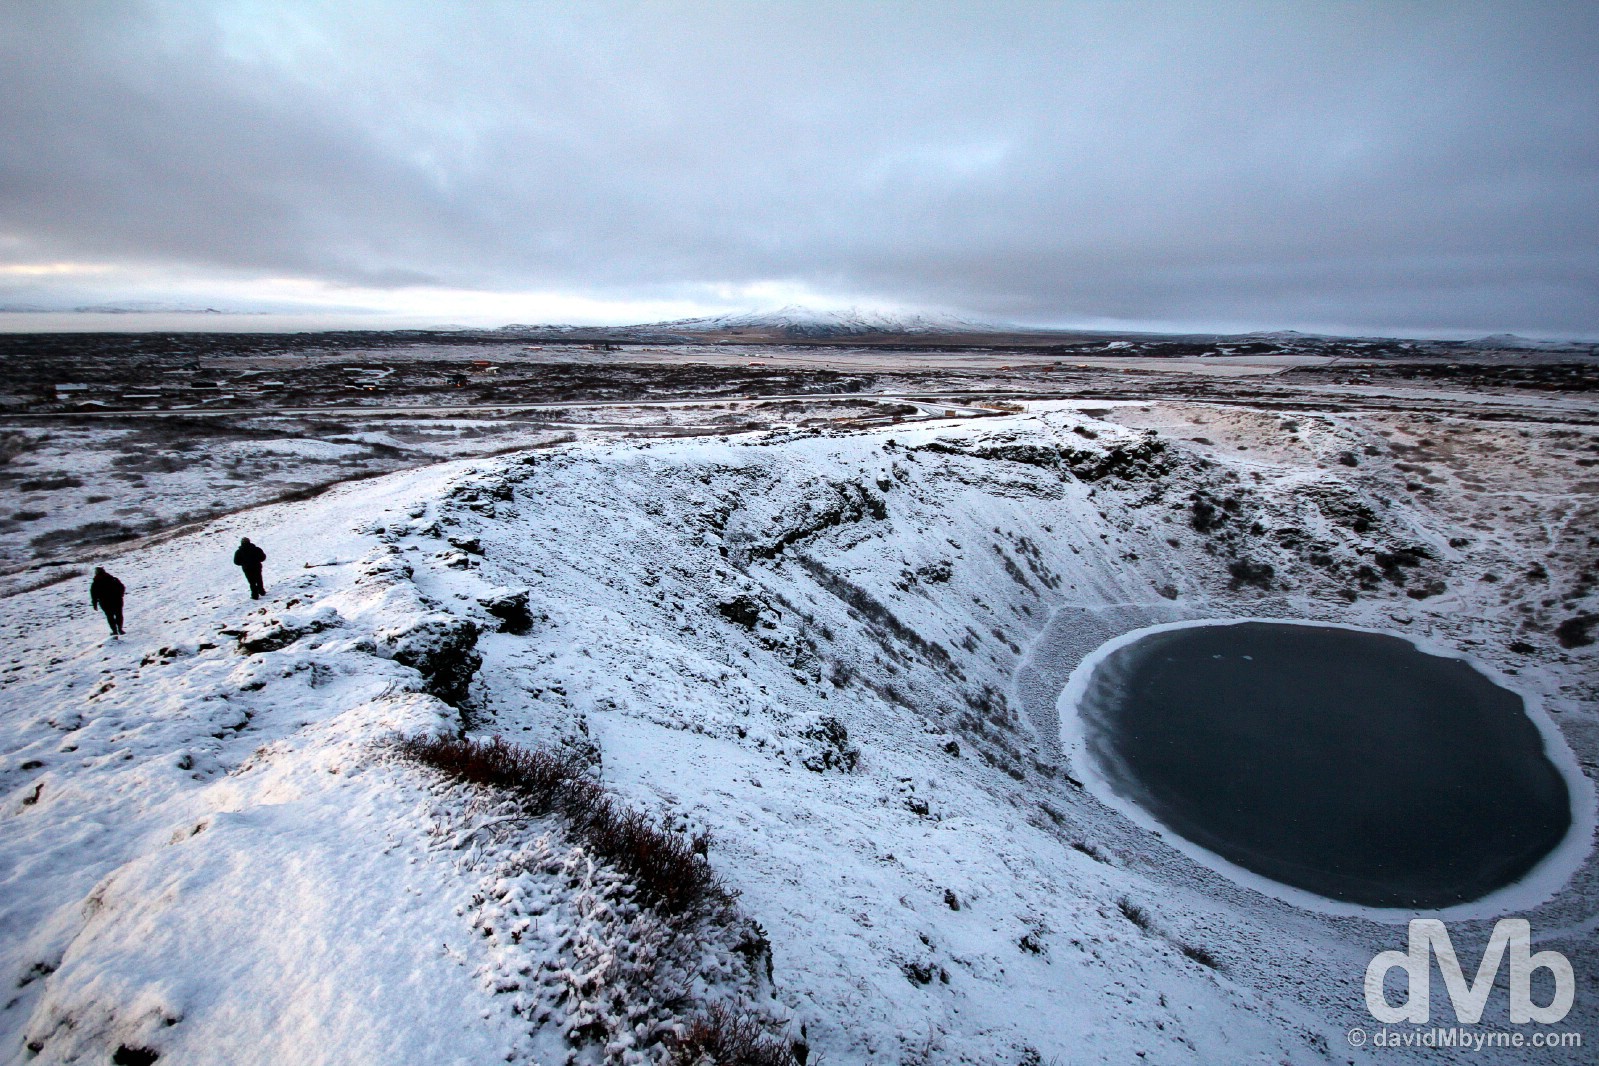 Walking by the rim of the 6,500-year-old Kerio crater in southwest Iceland. December 3, 2012.